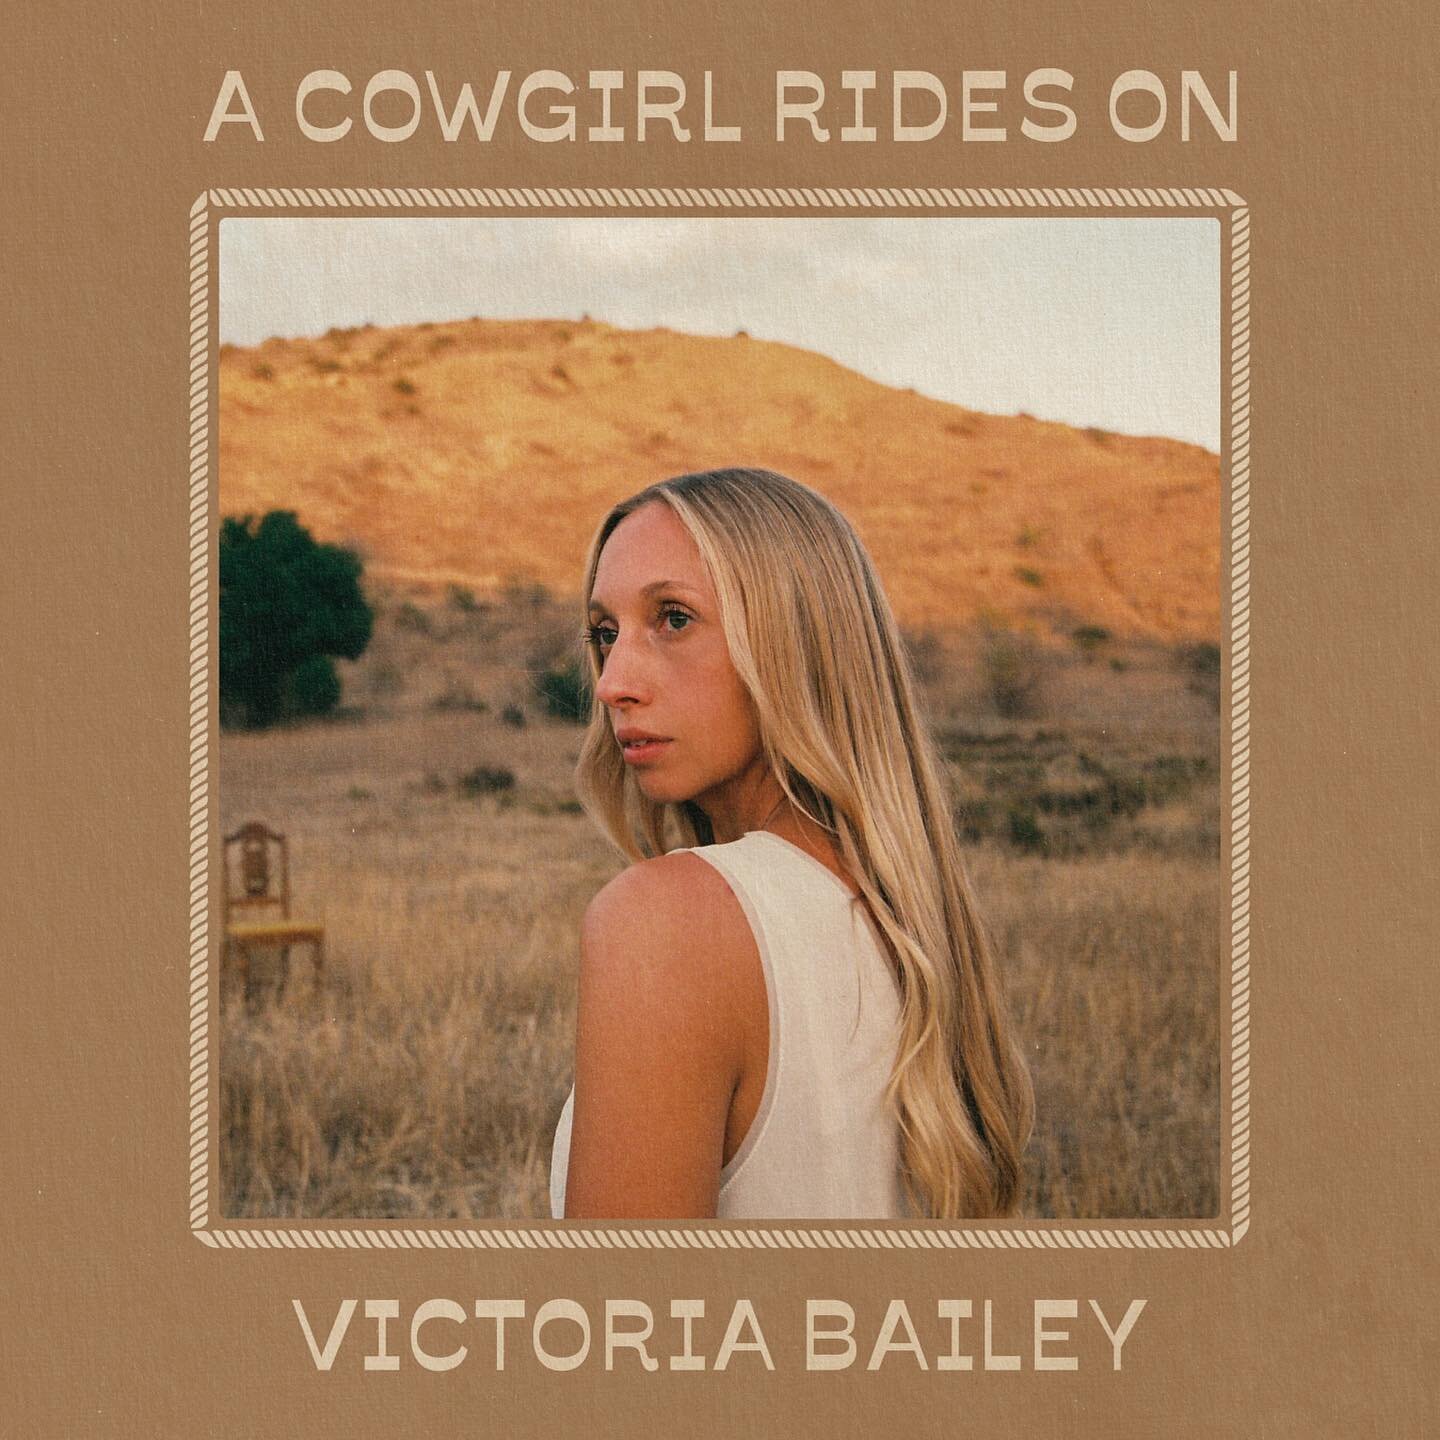 &ldquo;A Cowgirl Rides On&rdquo; is out today 🤍👢👢🐎 This one is for the cowgirls. An ode to their strength and ability to saddle up &amp; ride on through whatever heartbreaks and hardships come their way. I&rsquo;m full of emotion today releasing 